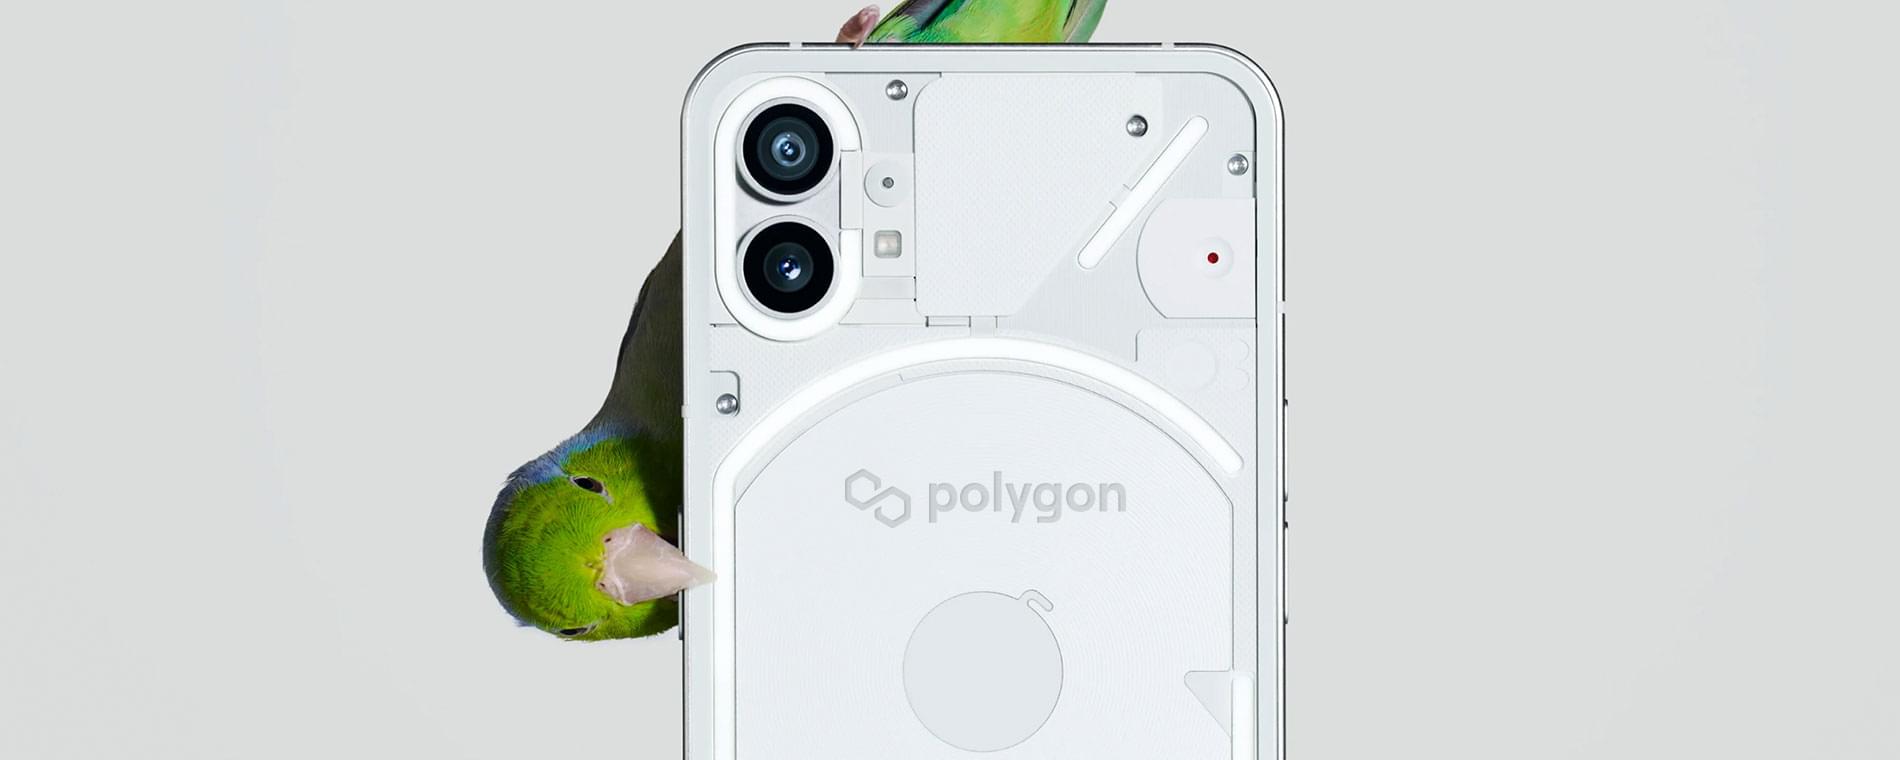 Polygon makes Web3 smartphone with Nothing